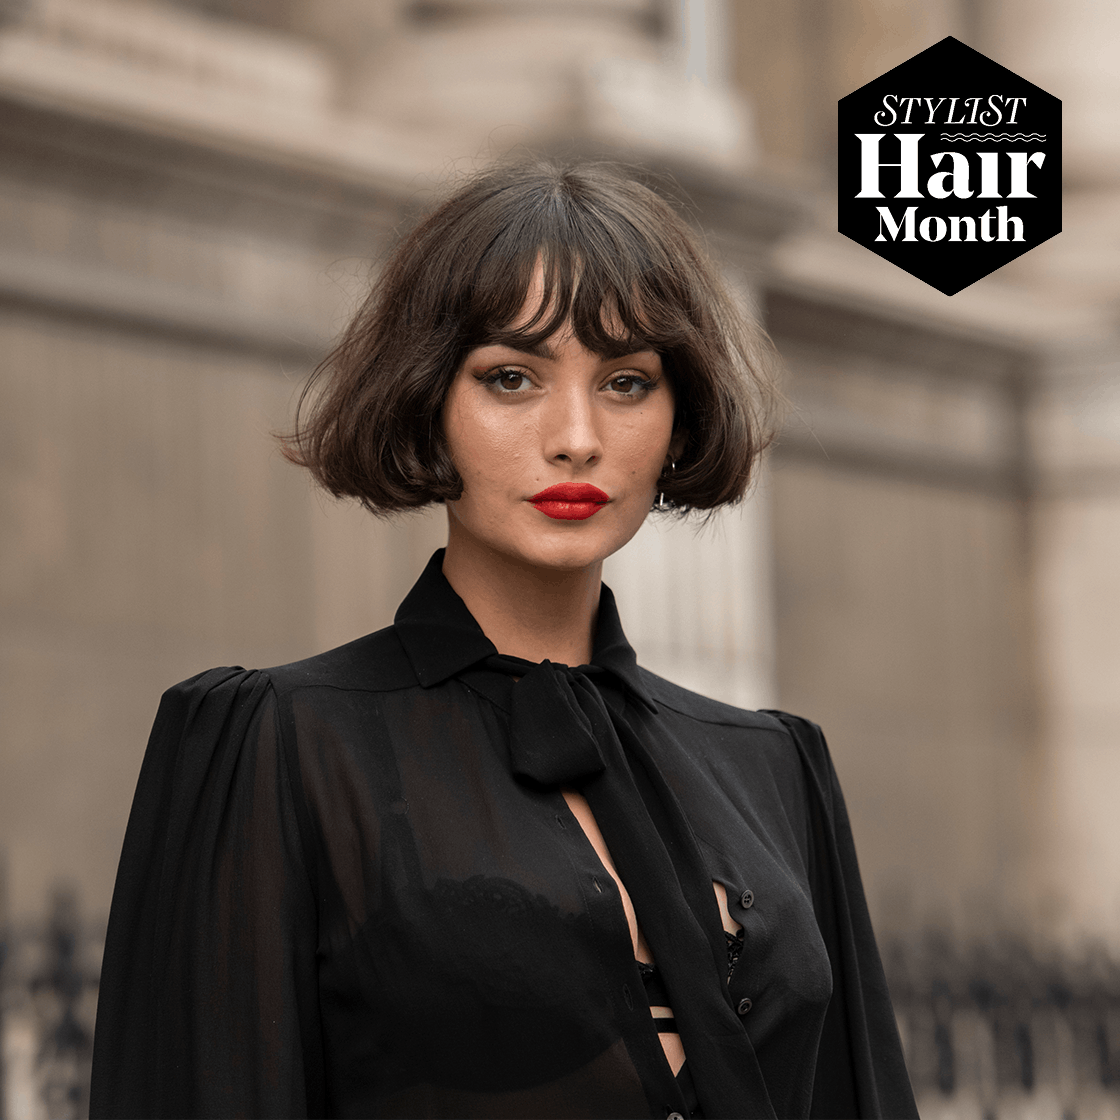 The trending French bob haircut epitomises cool girl glamour